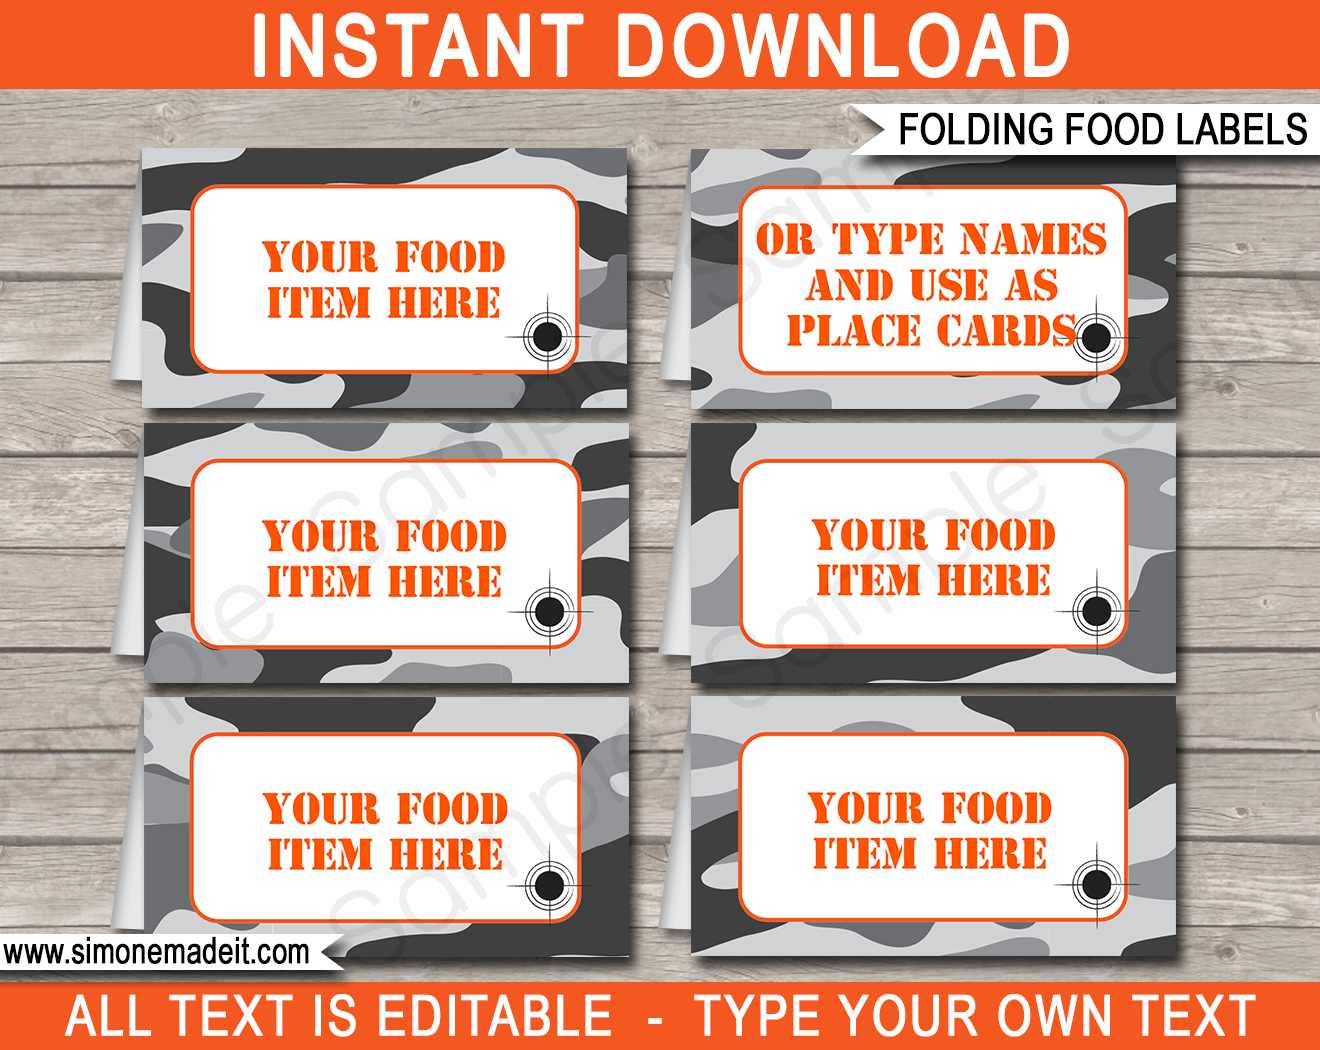 Nerf Party Food Labels | Food Buffet Cards | Place Cards |Printable Party Decorations | DIY Editable template | $3.00 Instant Download via simonemadeit.com